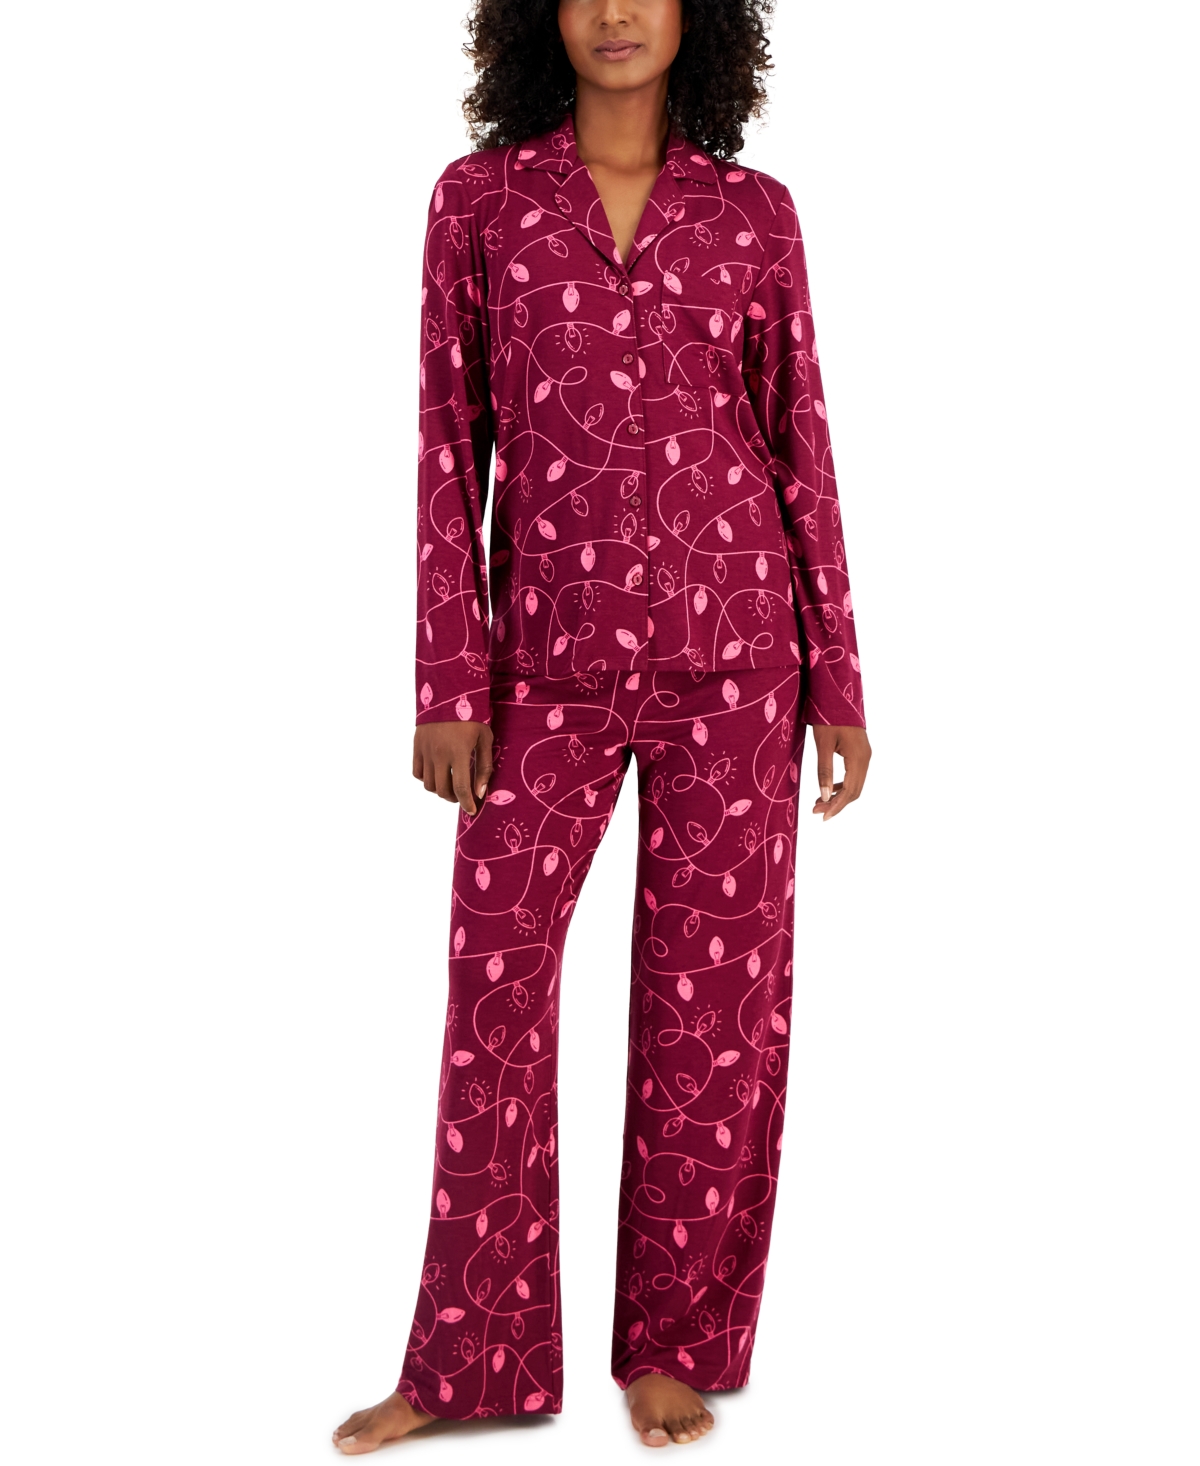 Women's Supersoft Notched-Collar Pajamas Set, Created for Macy's - Xmas Light Smpl